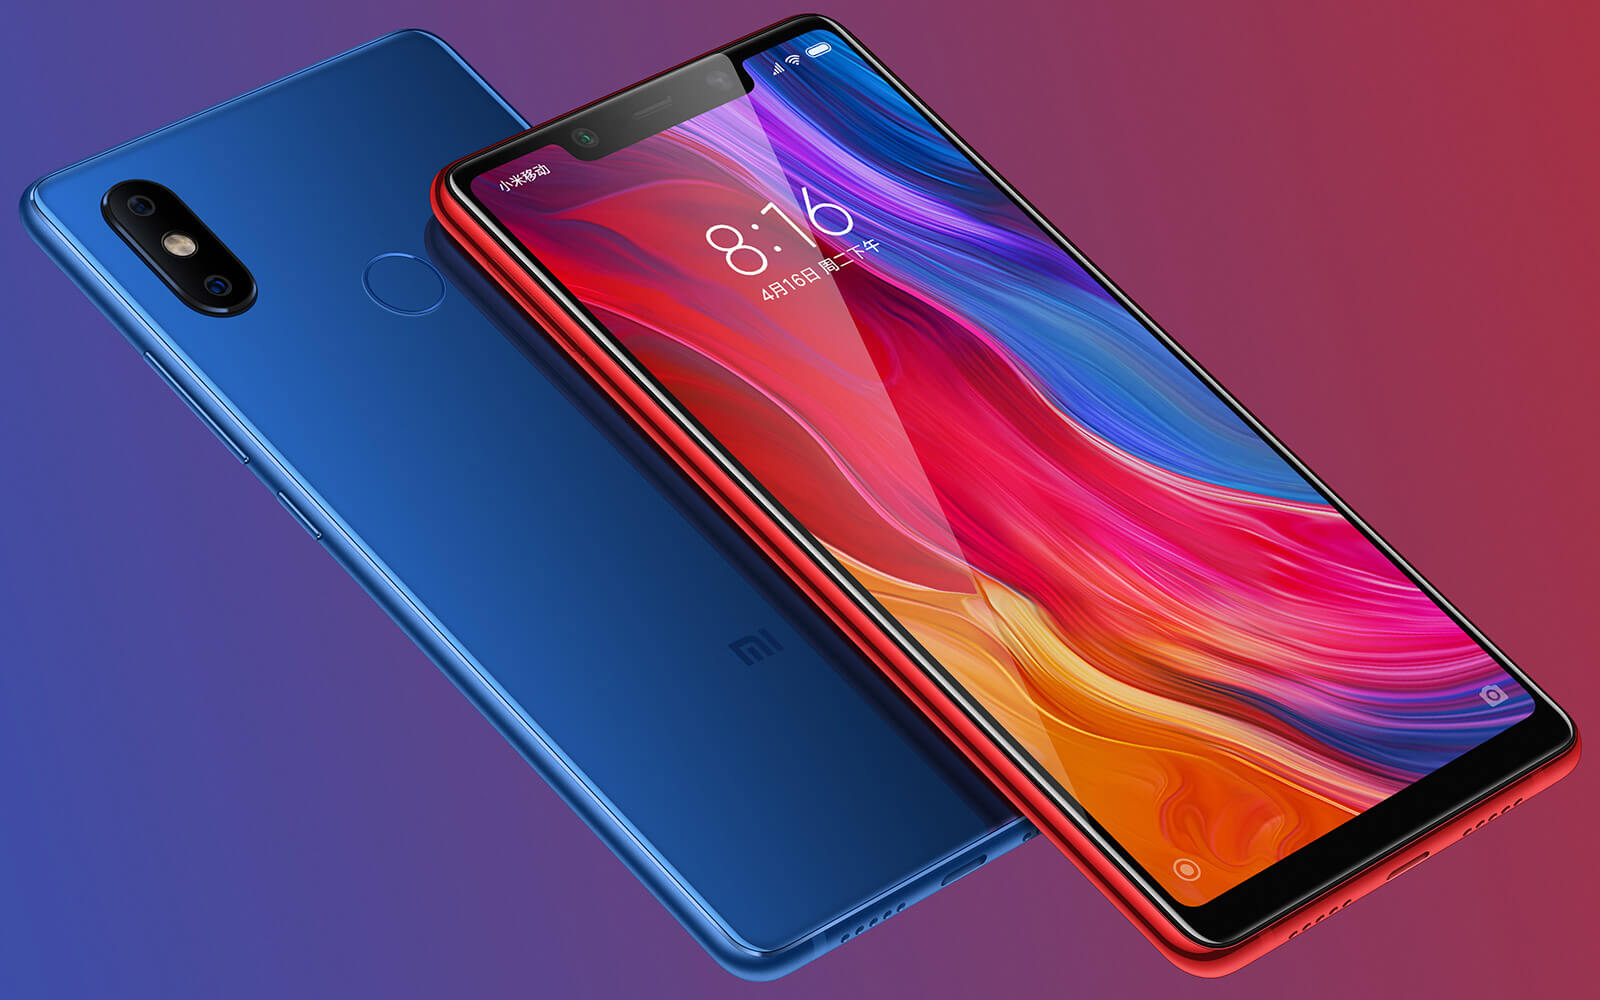 Xiaomi Mi 8 launched: 6.21 flagship with vertical dual-lens camera